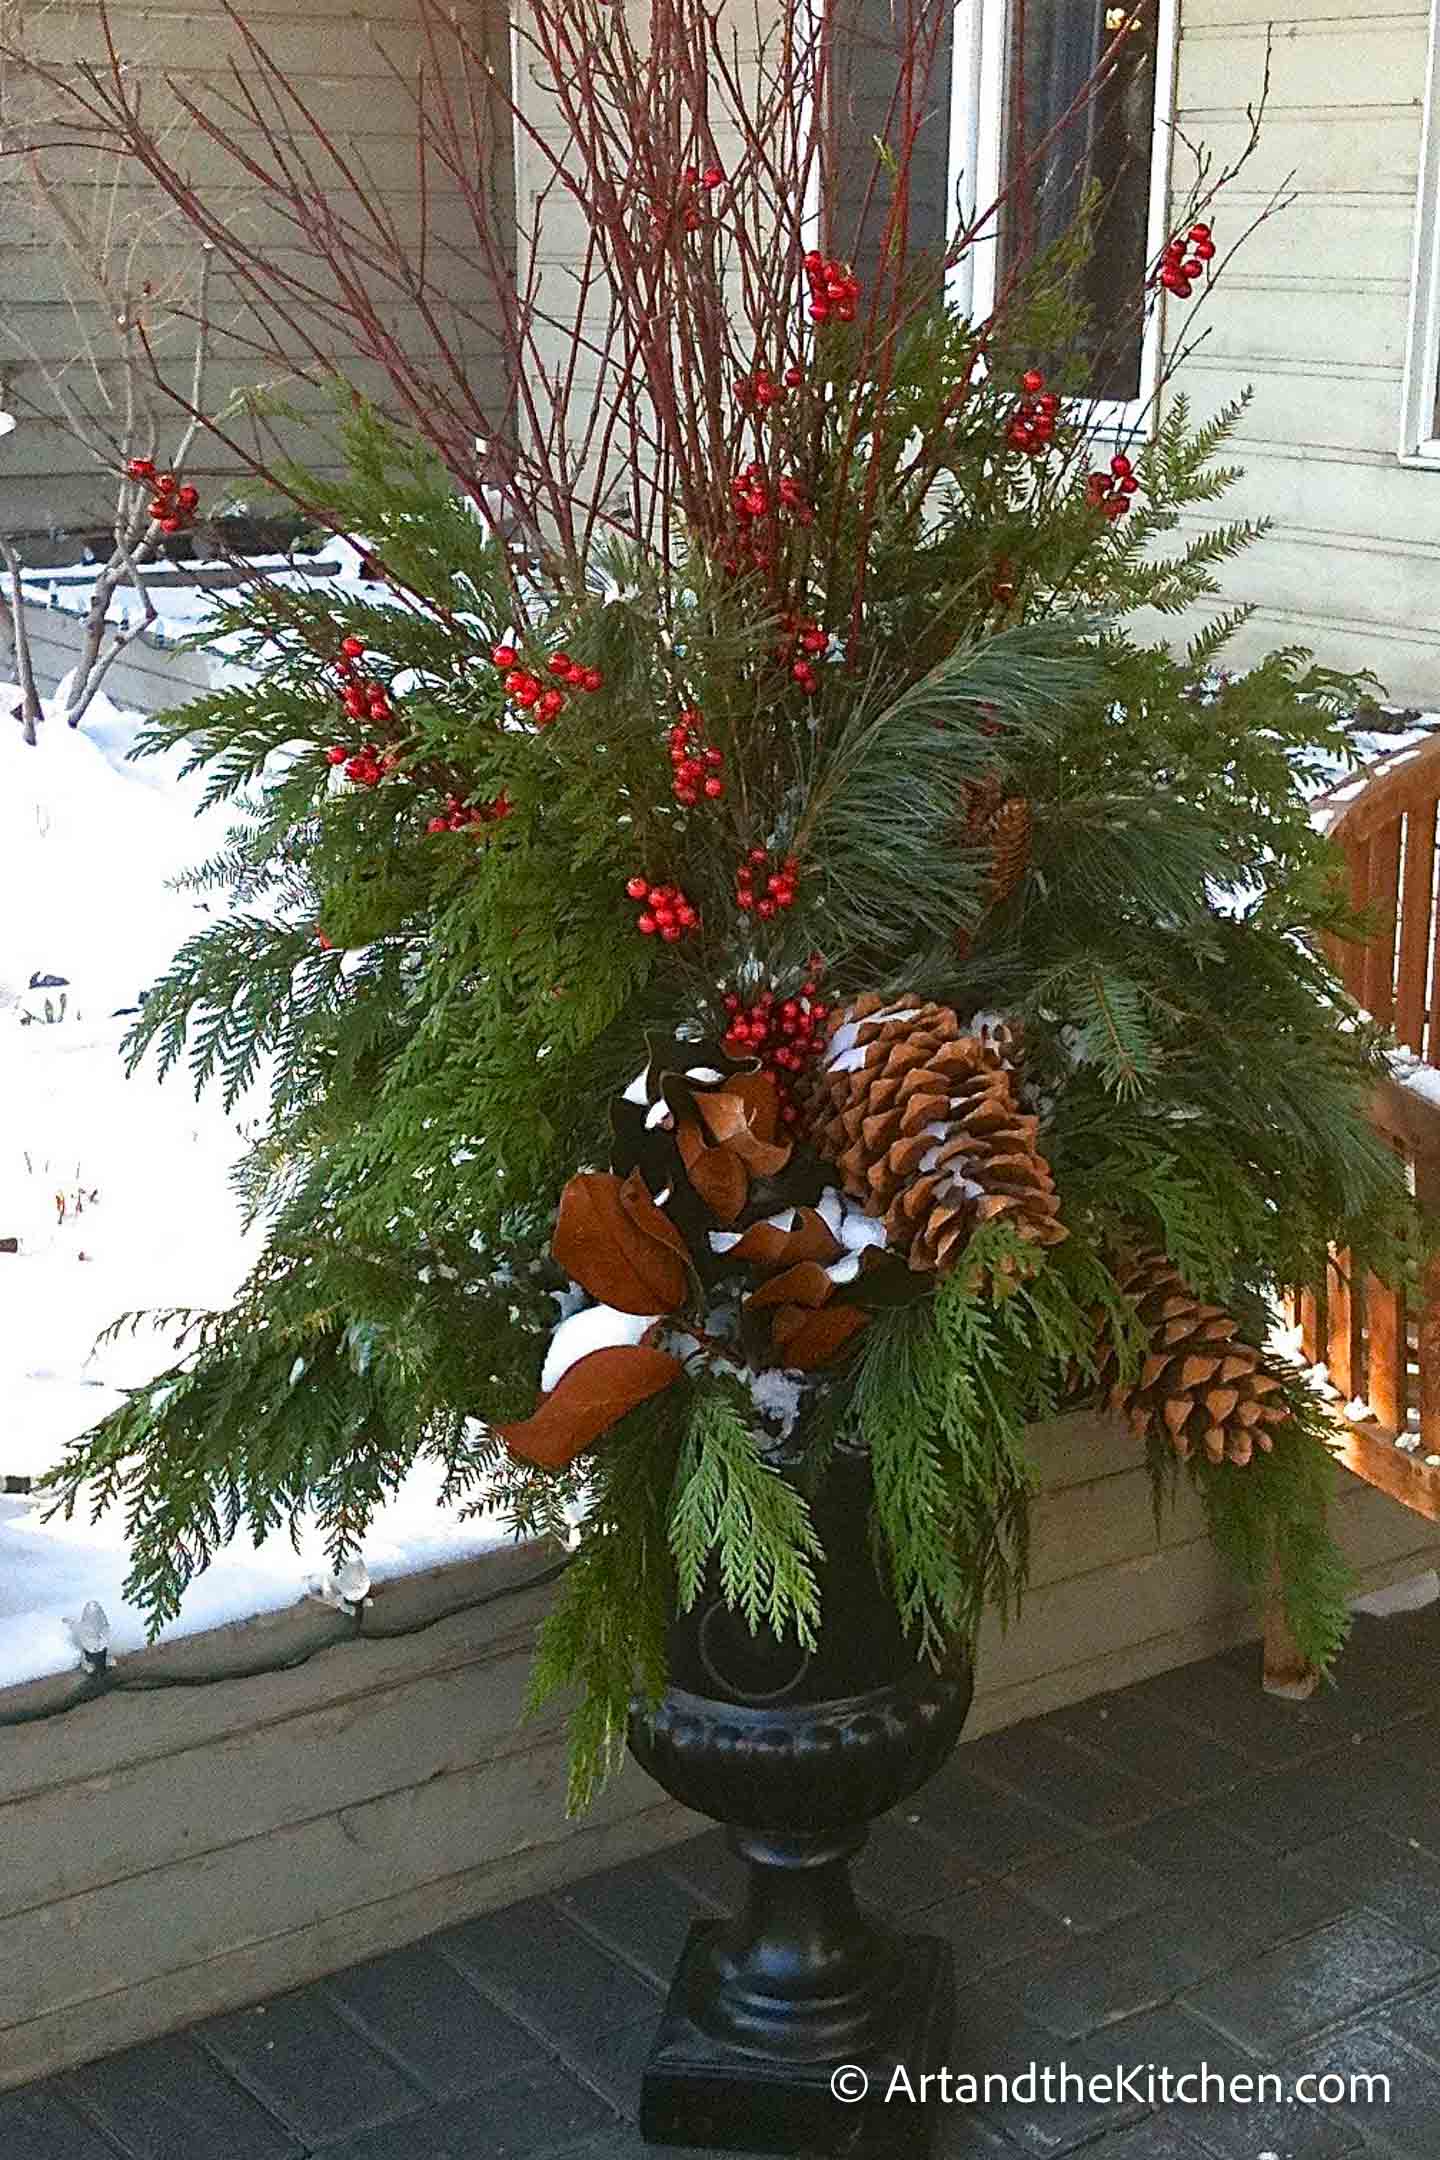 Outdoor Christmas planter with greenery, tree branches and decorations.